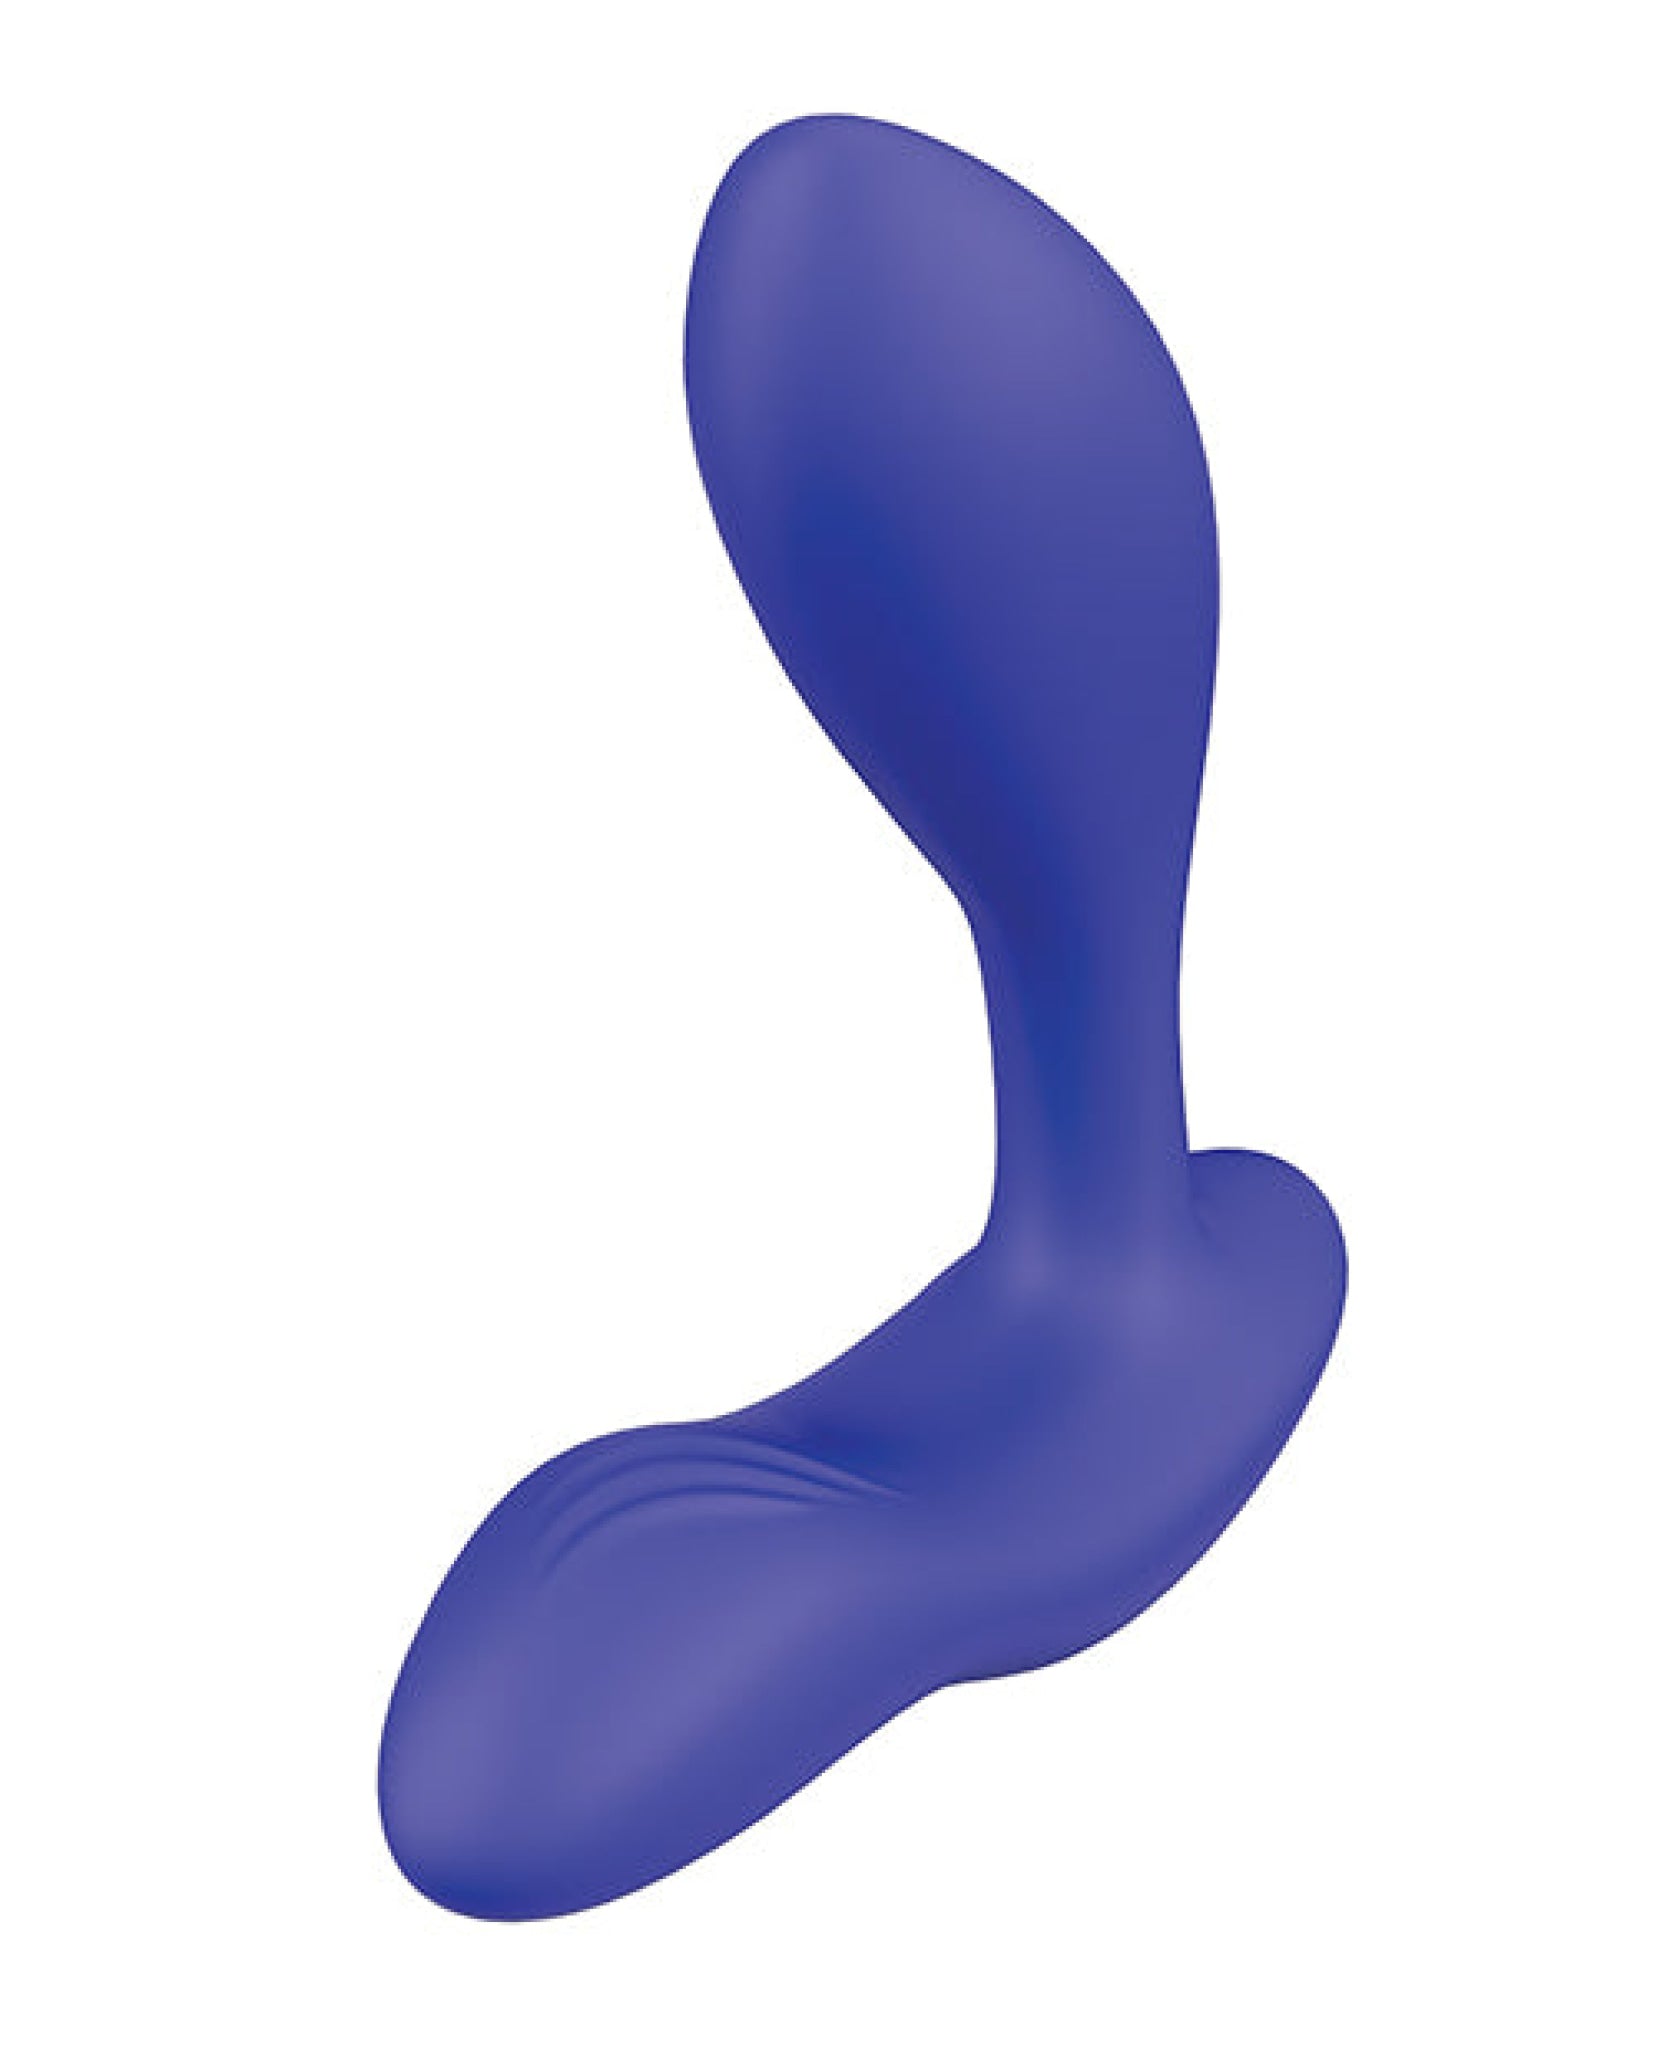 We-vibe Vector+ We-Vibe®